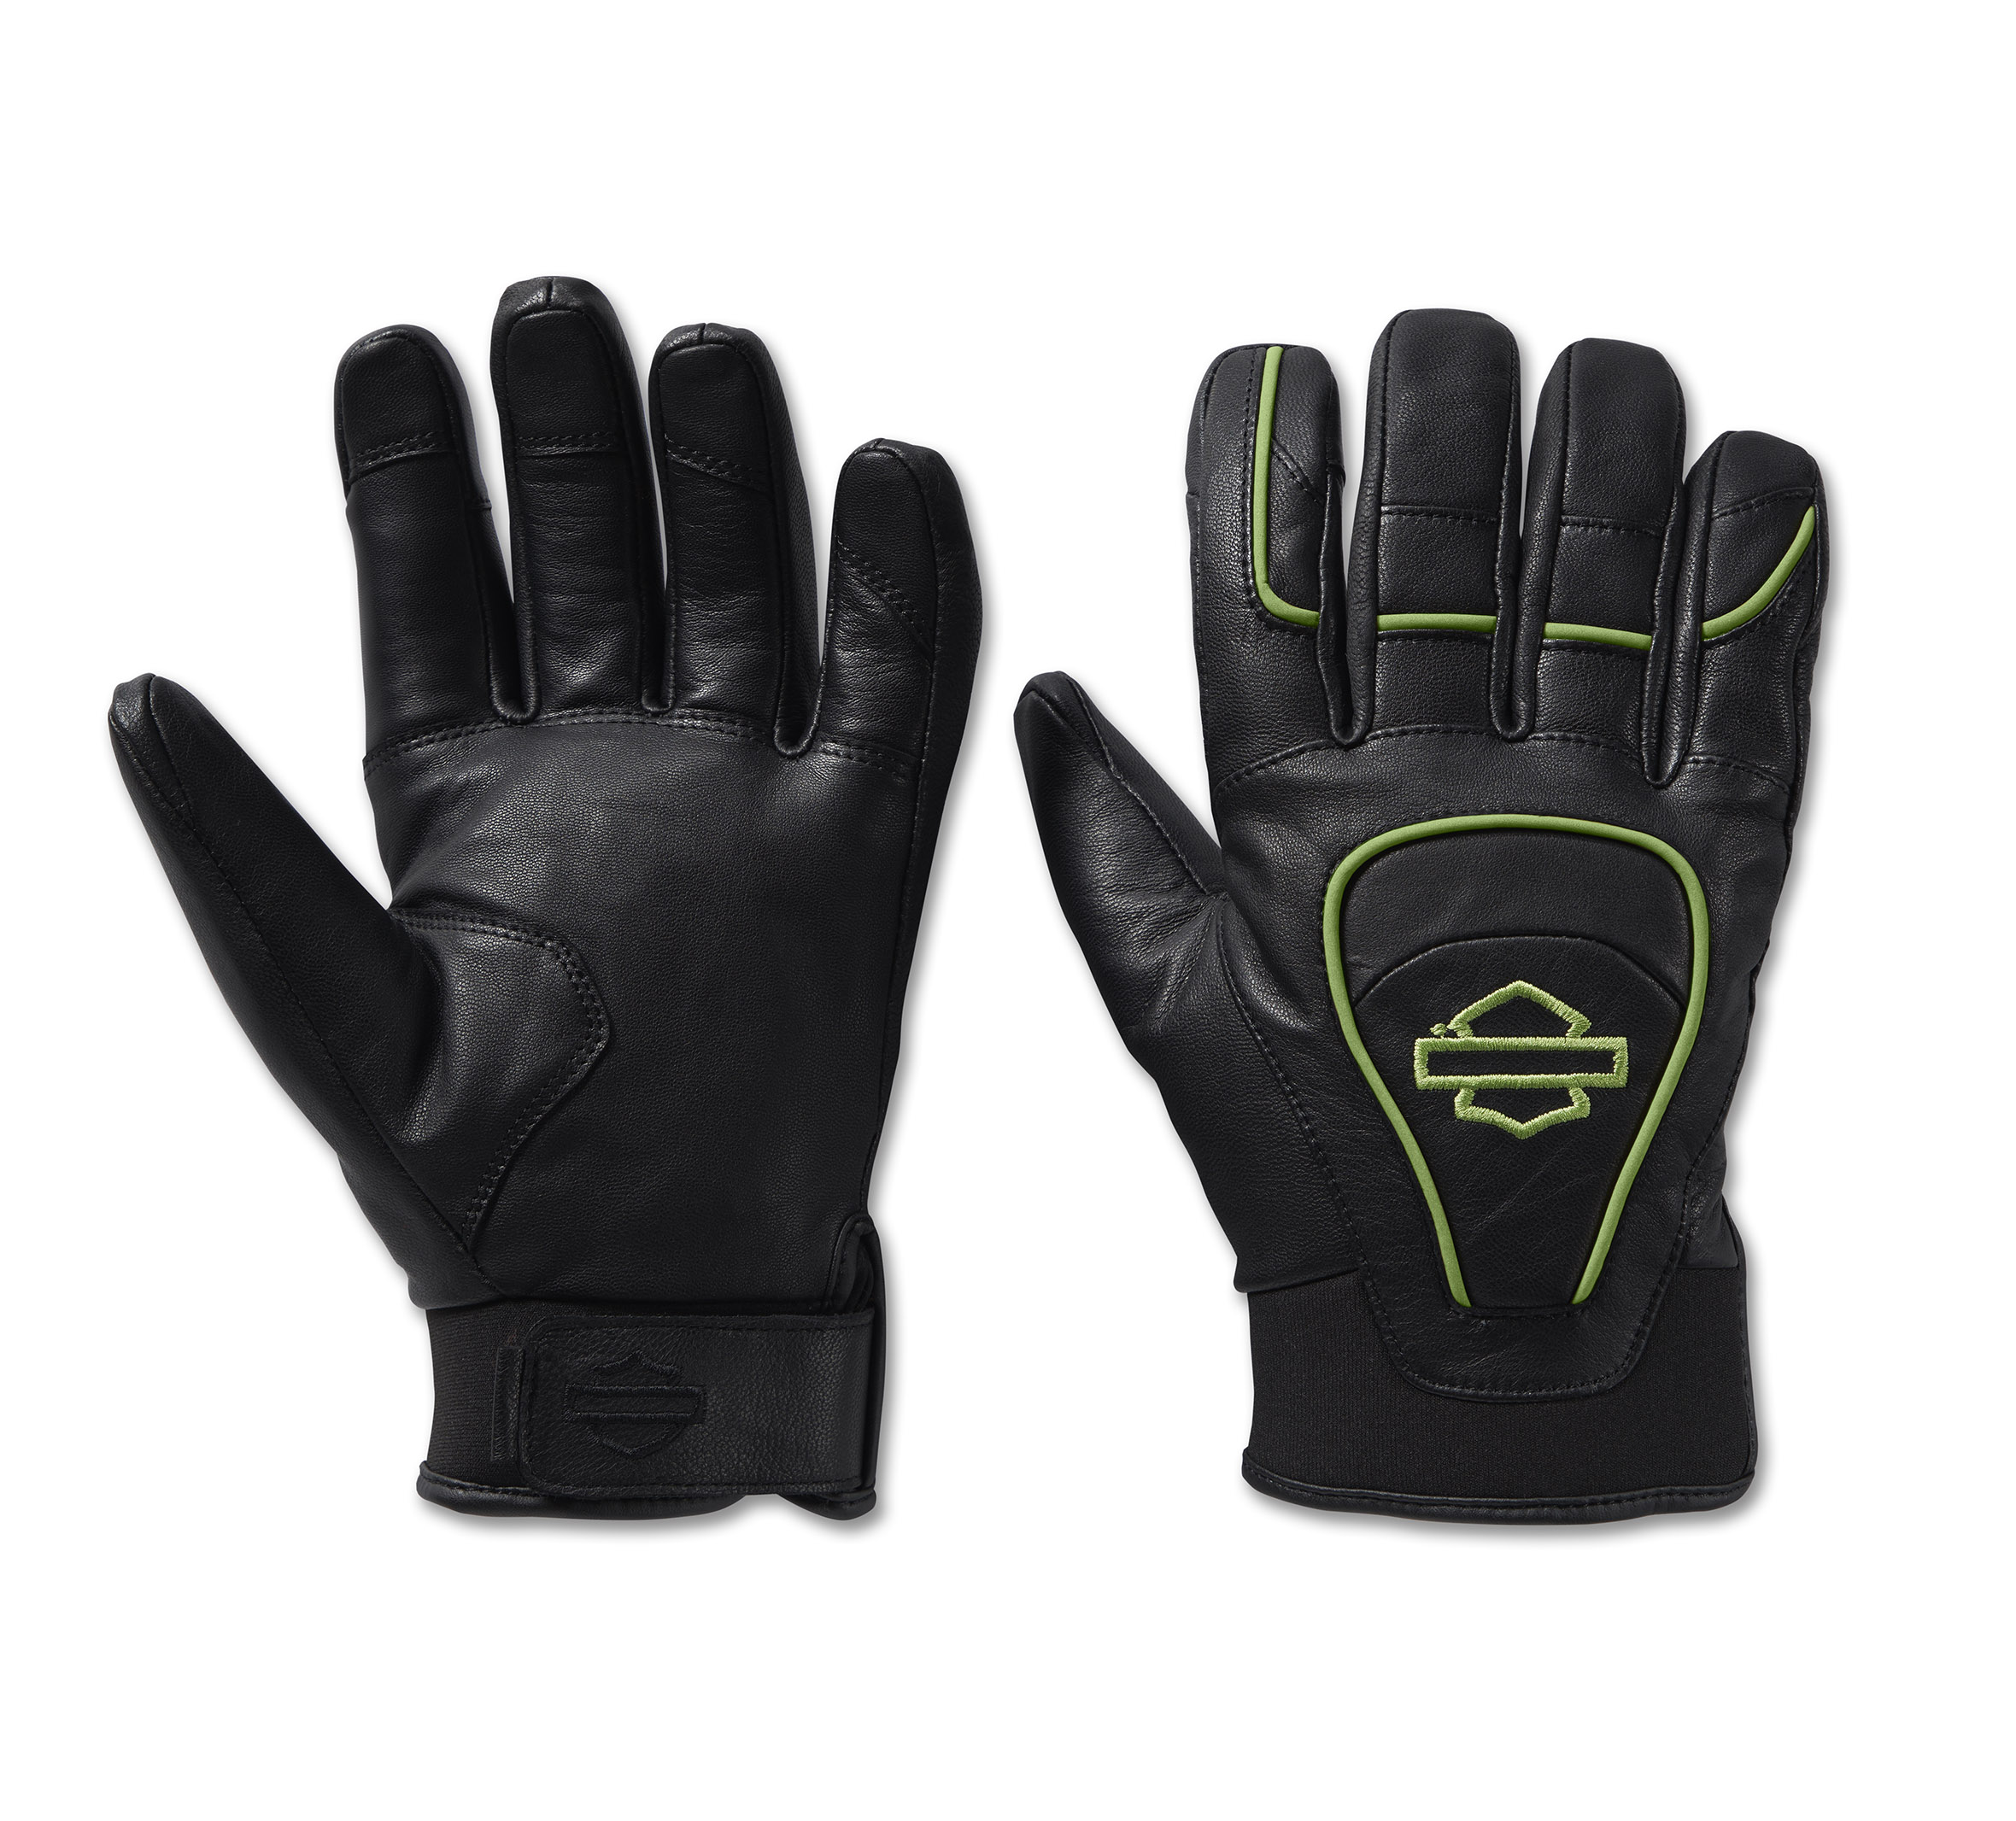 Water Resistant Goat Skin Leather Winter gloves – Glove Station